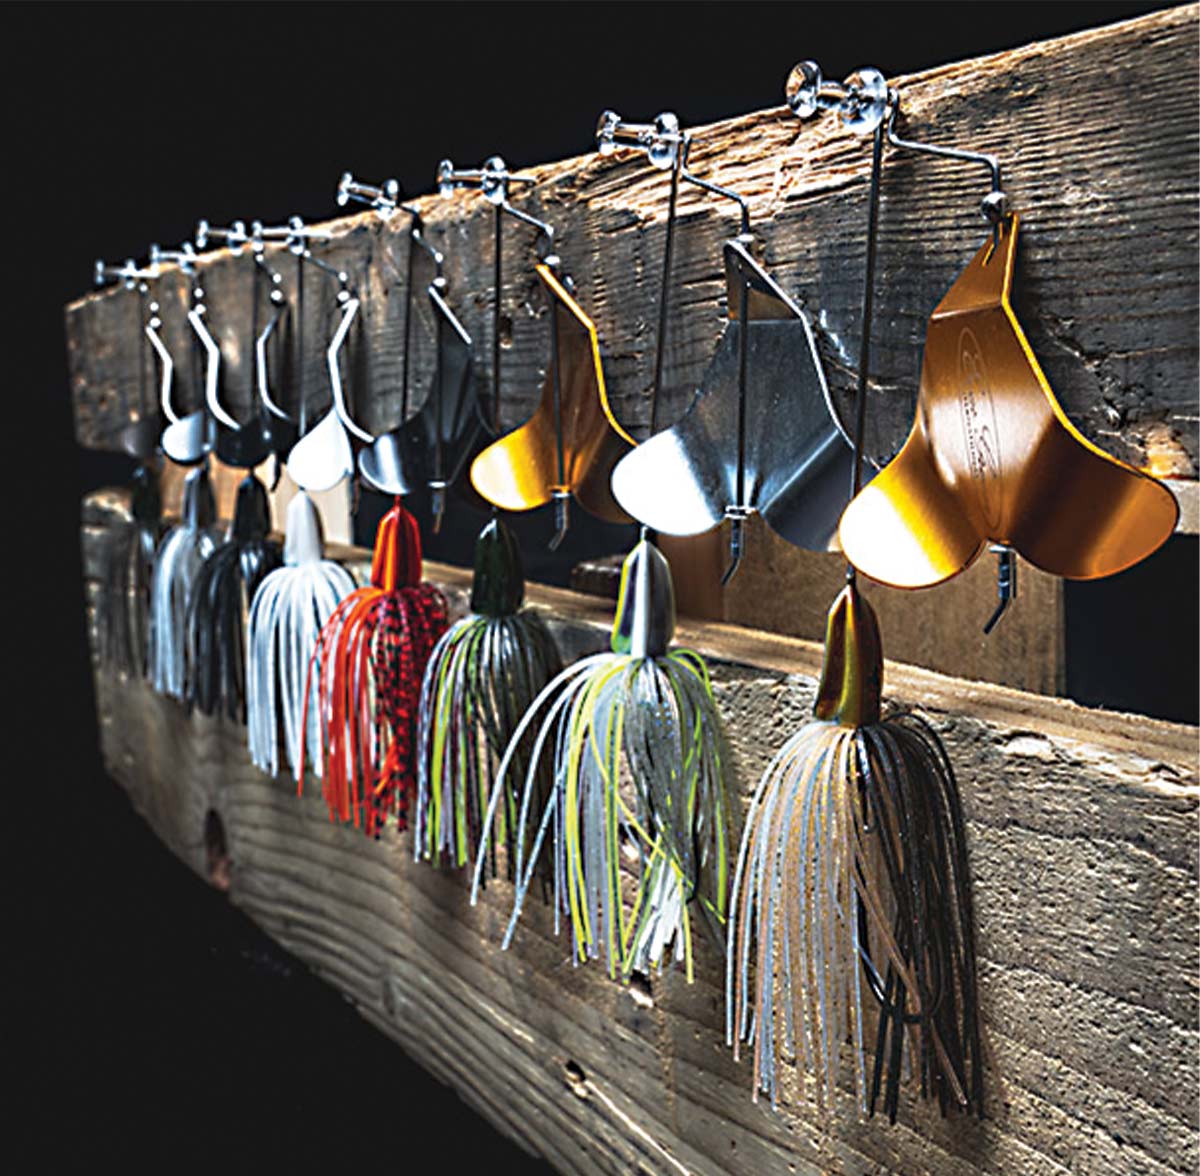 multicolored fishing lures hanging from a wood plank